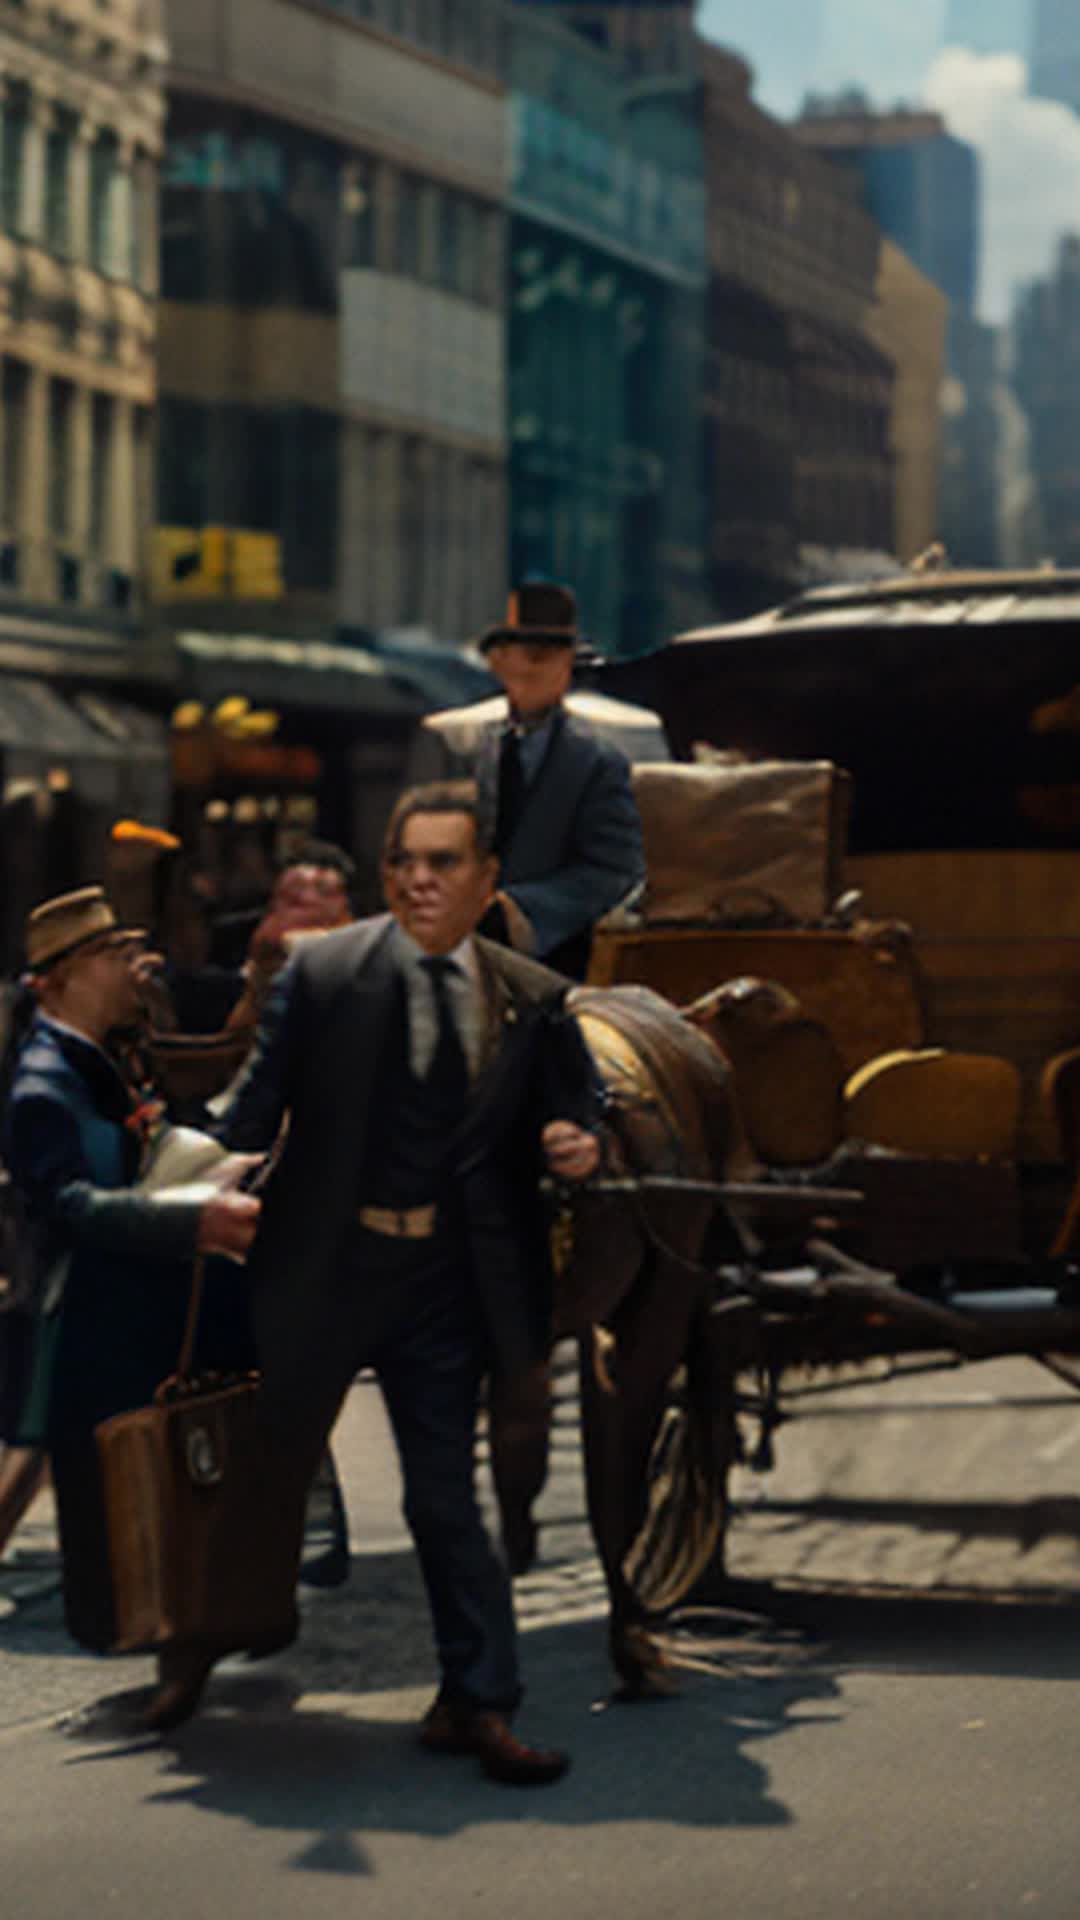 Young economist, crowded New York streets, clutching papers about central bank, dodging horse-drawn carriages, busy, vibrant atmosphere, early 20th century attire, bustling, energetic movement, historical architecture background, soft shadows, detailed and sharp focus